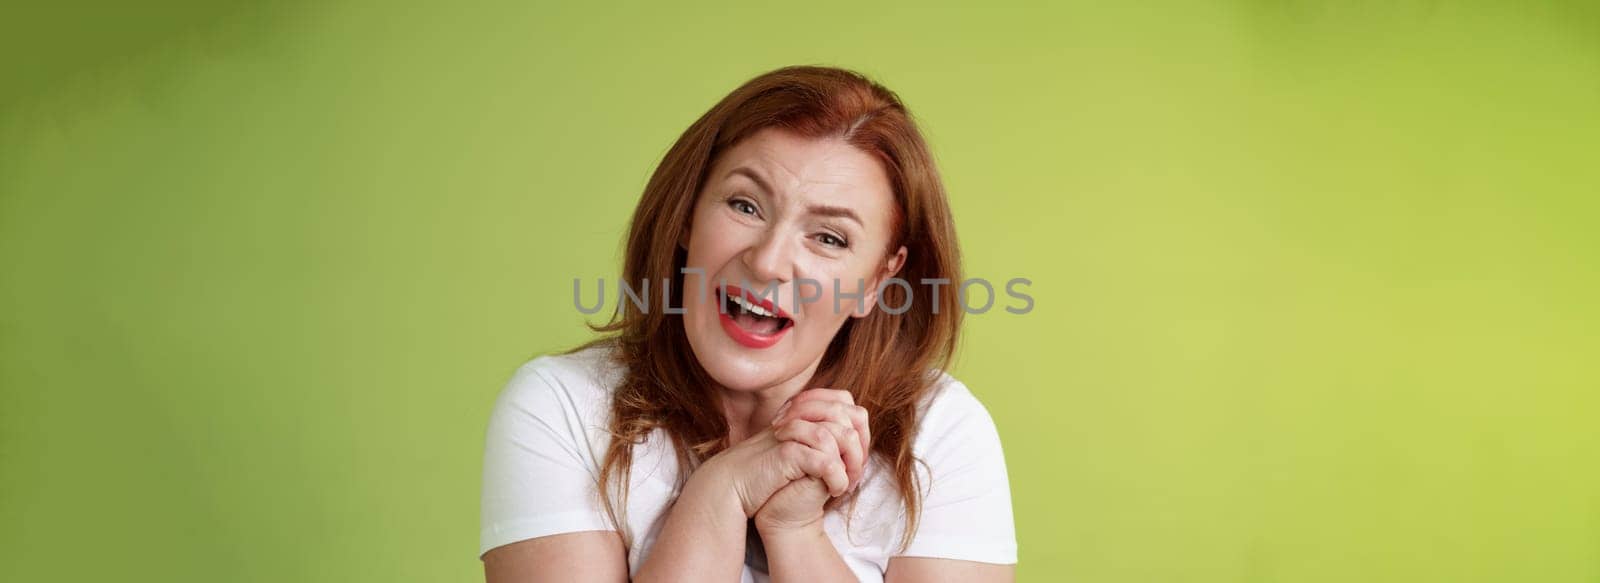 Close-yp touched tender kind redhead middle-aged granny. sighing look admiration delight clasp hands heartwarming lovely scene smiling tilting head impressed satisfied stand green background.